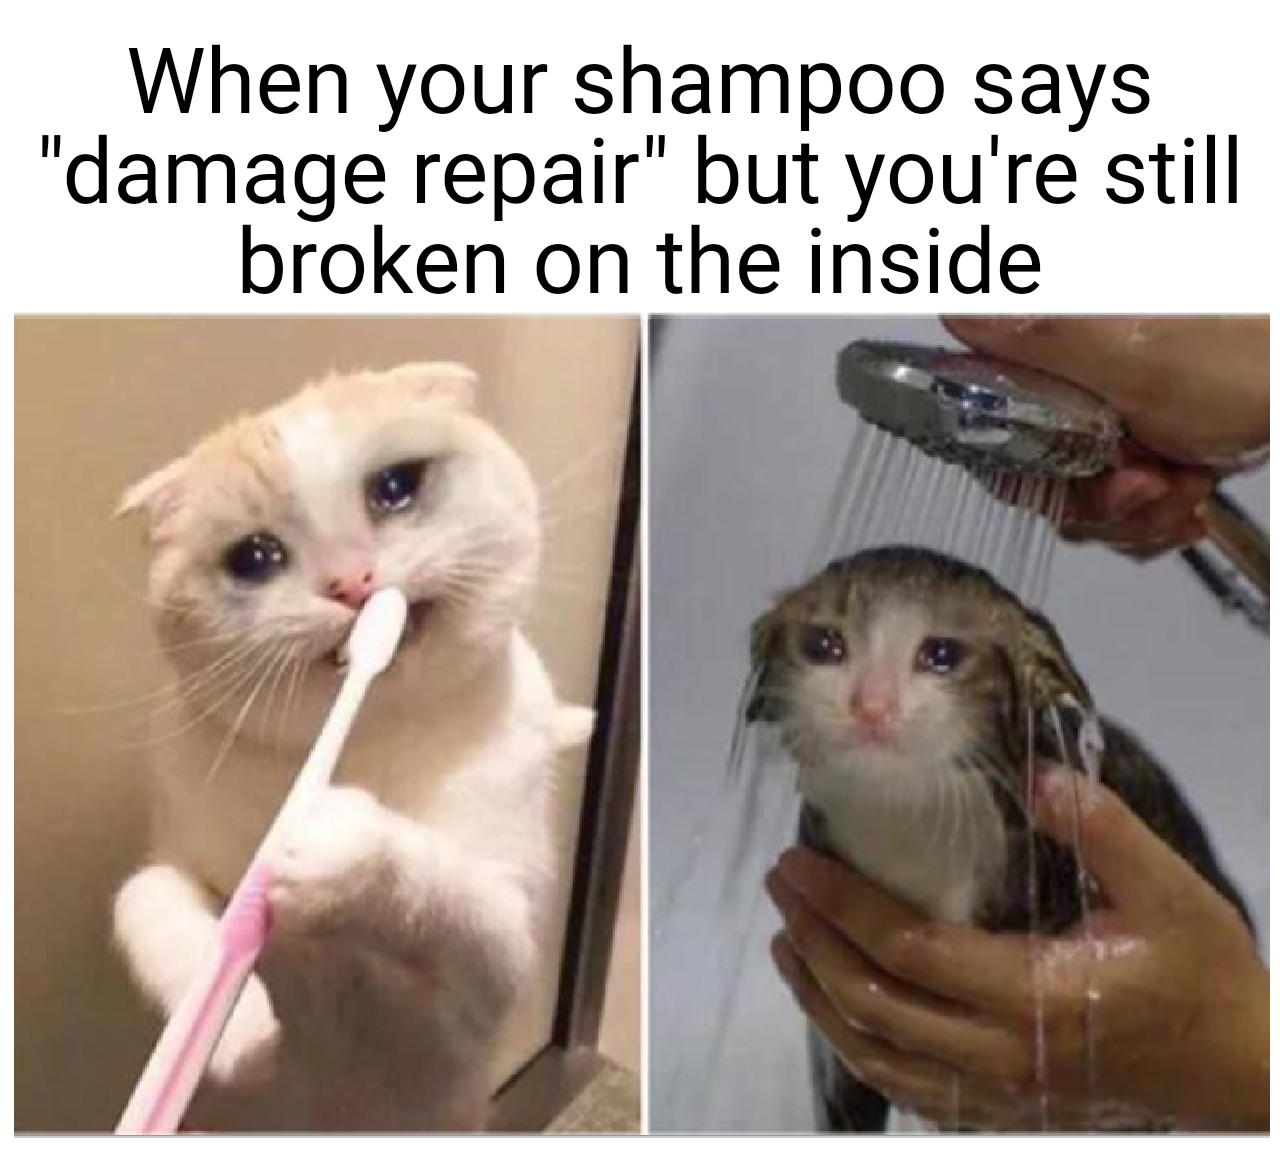 dank memes and funny pics - crying cat meme - When your shampoo says "damage repair" but you're still broken on the inside